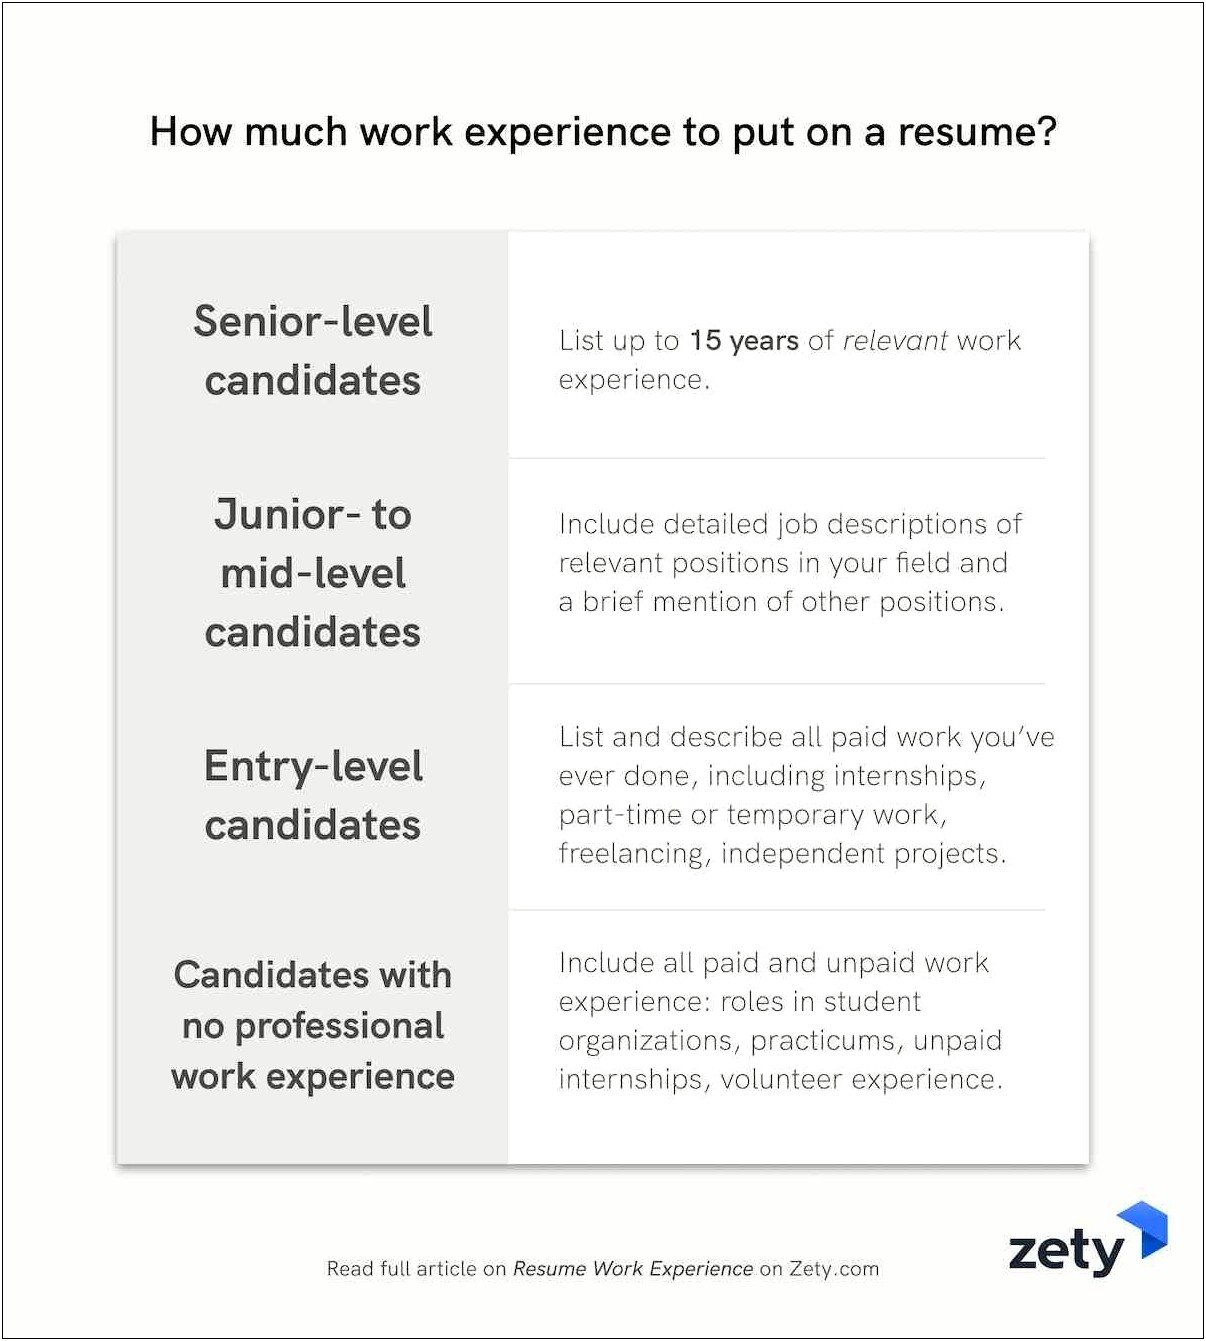 Types Of Experience To Put On Resume